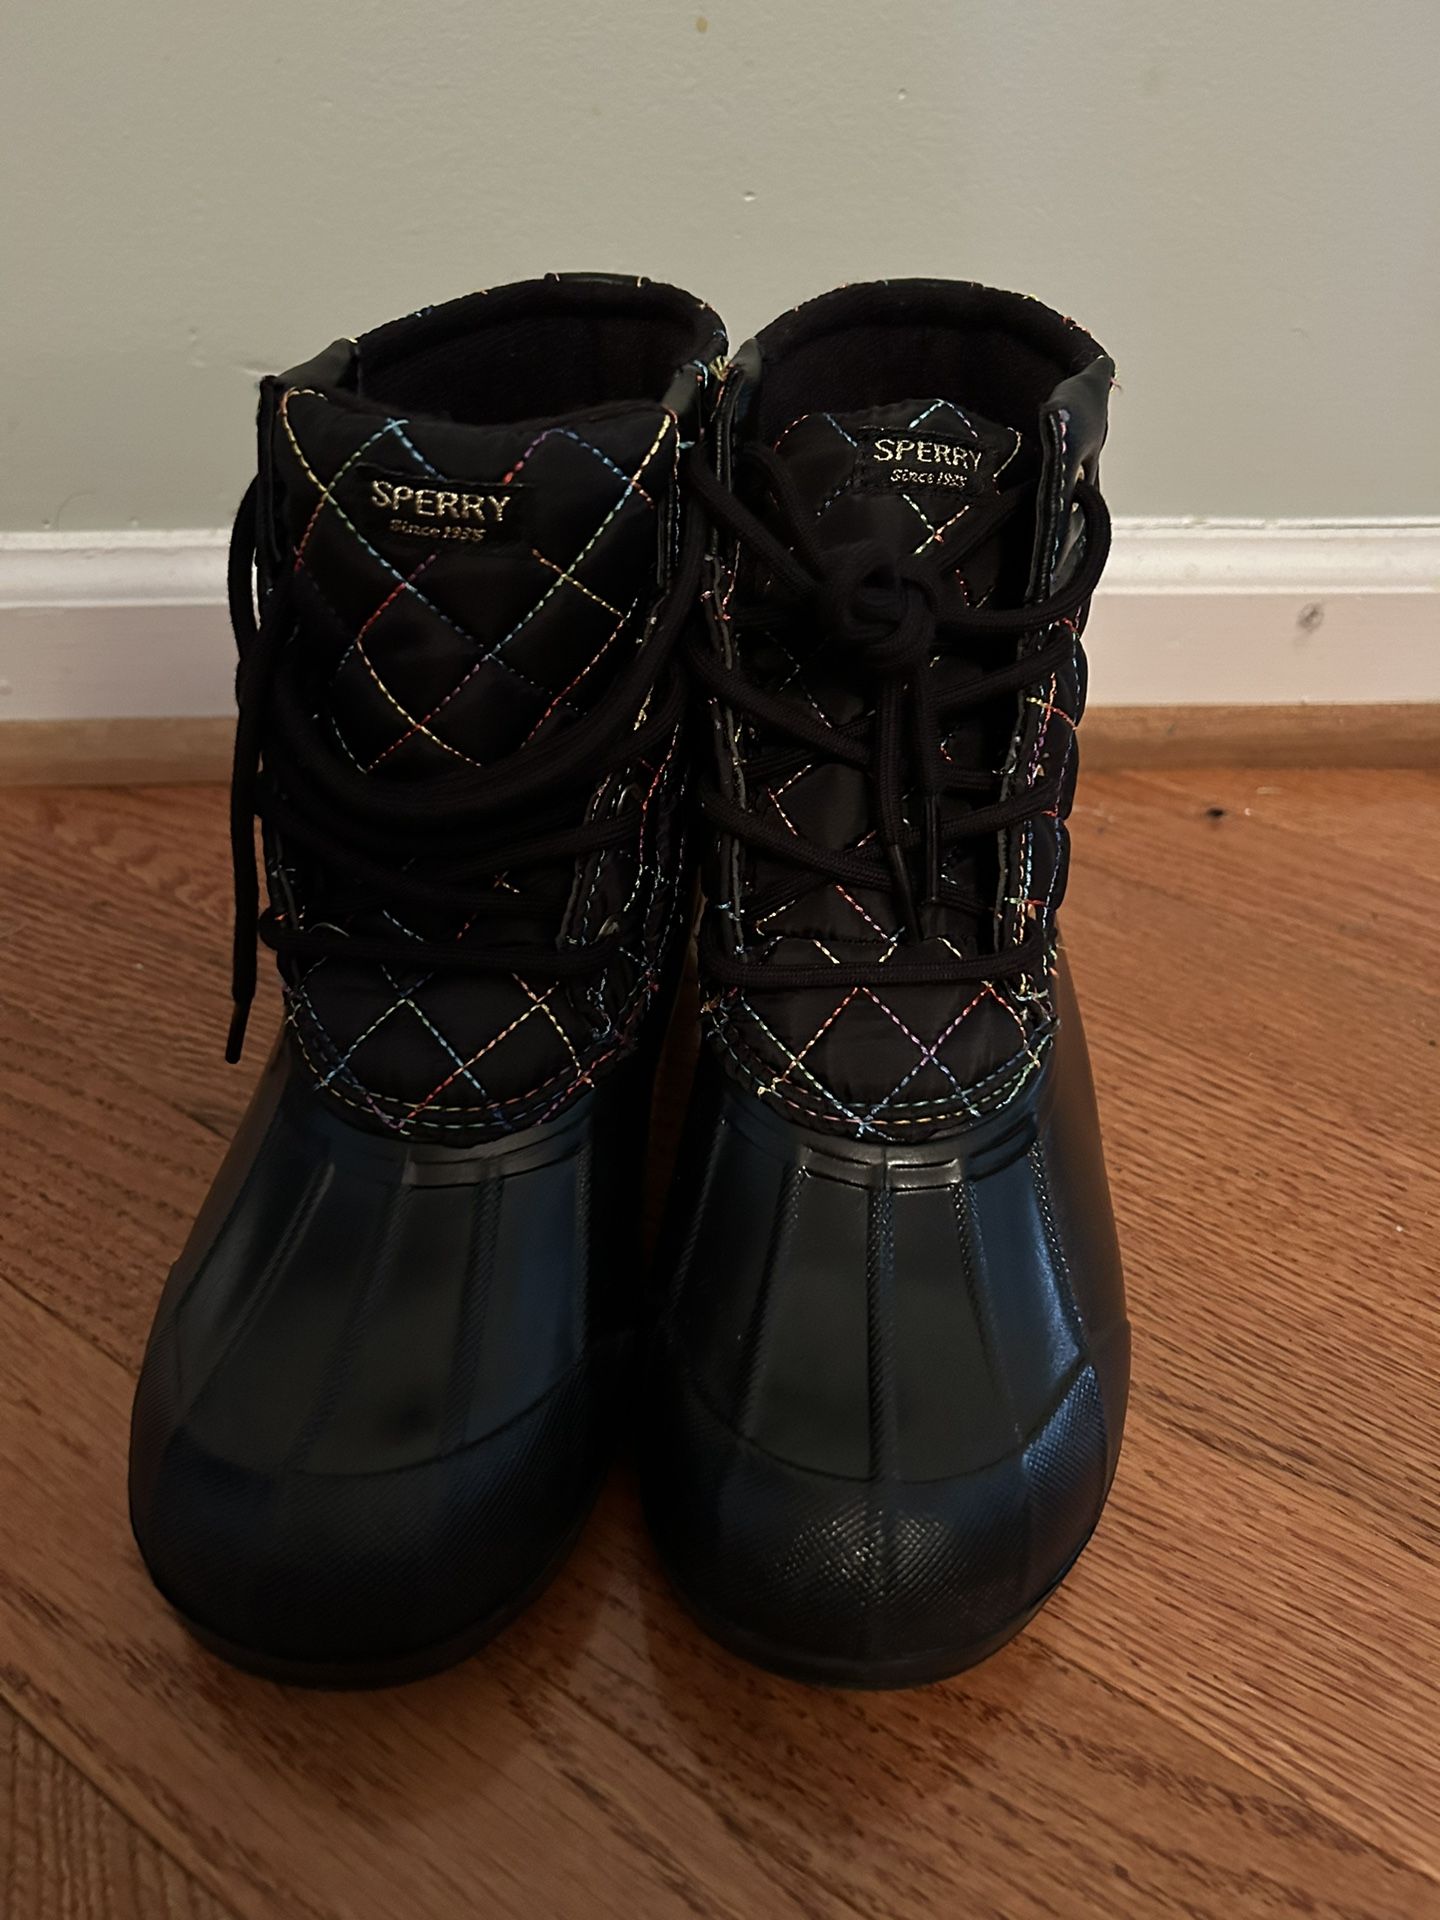 Sperry  port boot size 5 girls $25 snow  and rain.  Never Been Worn